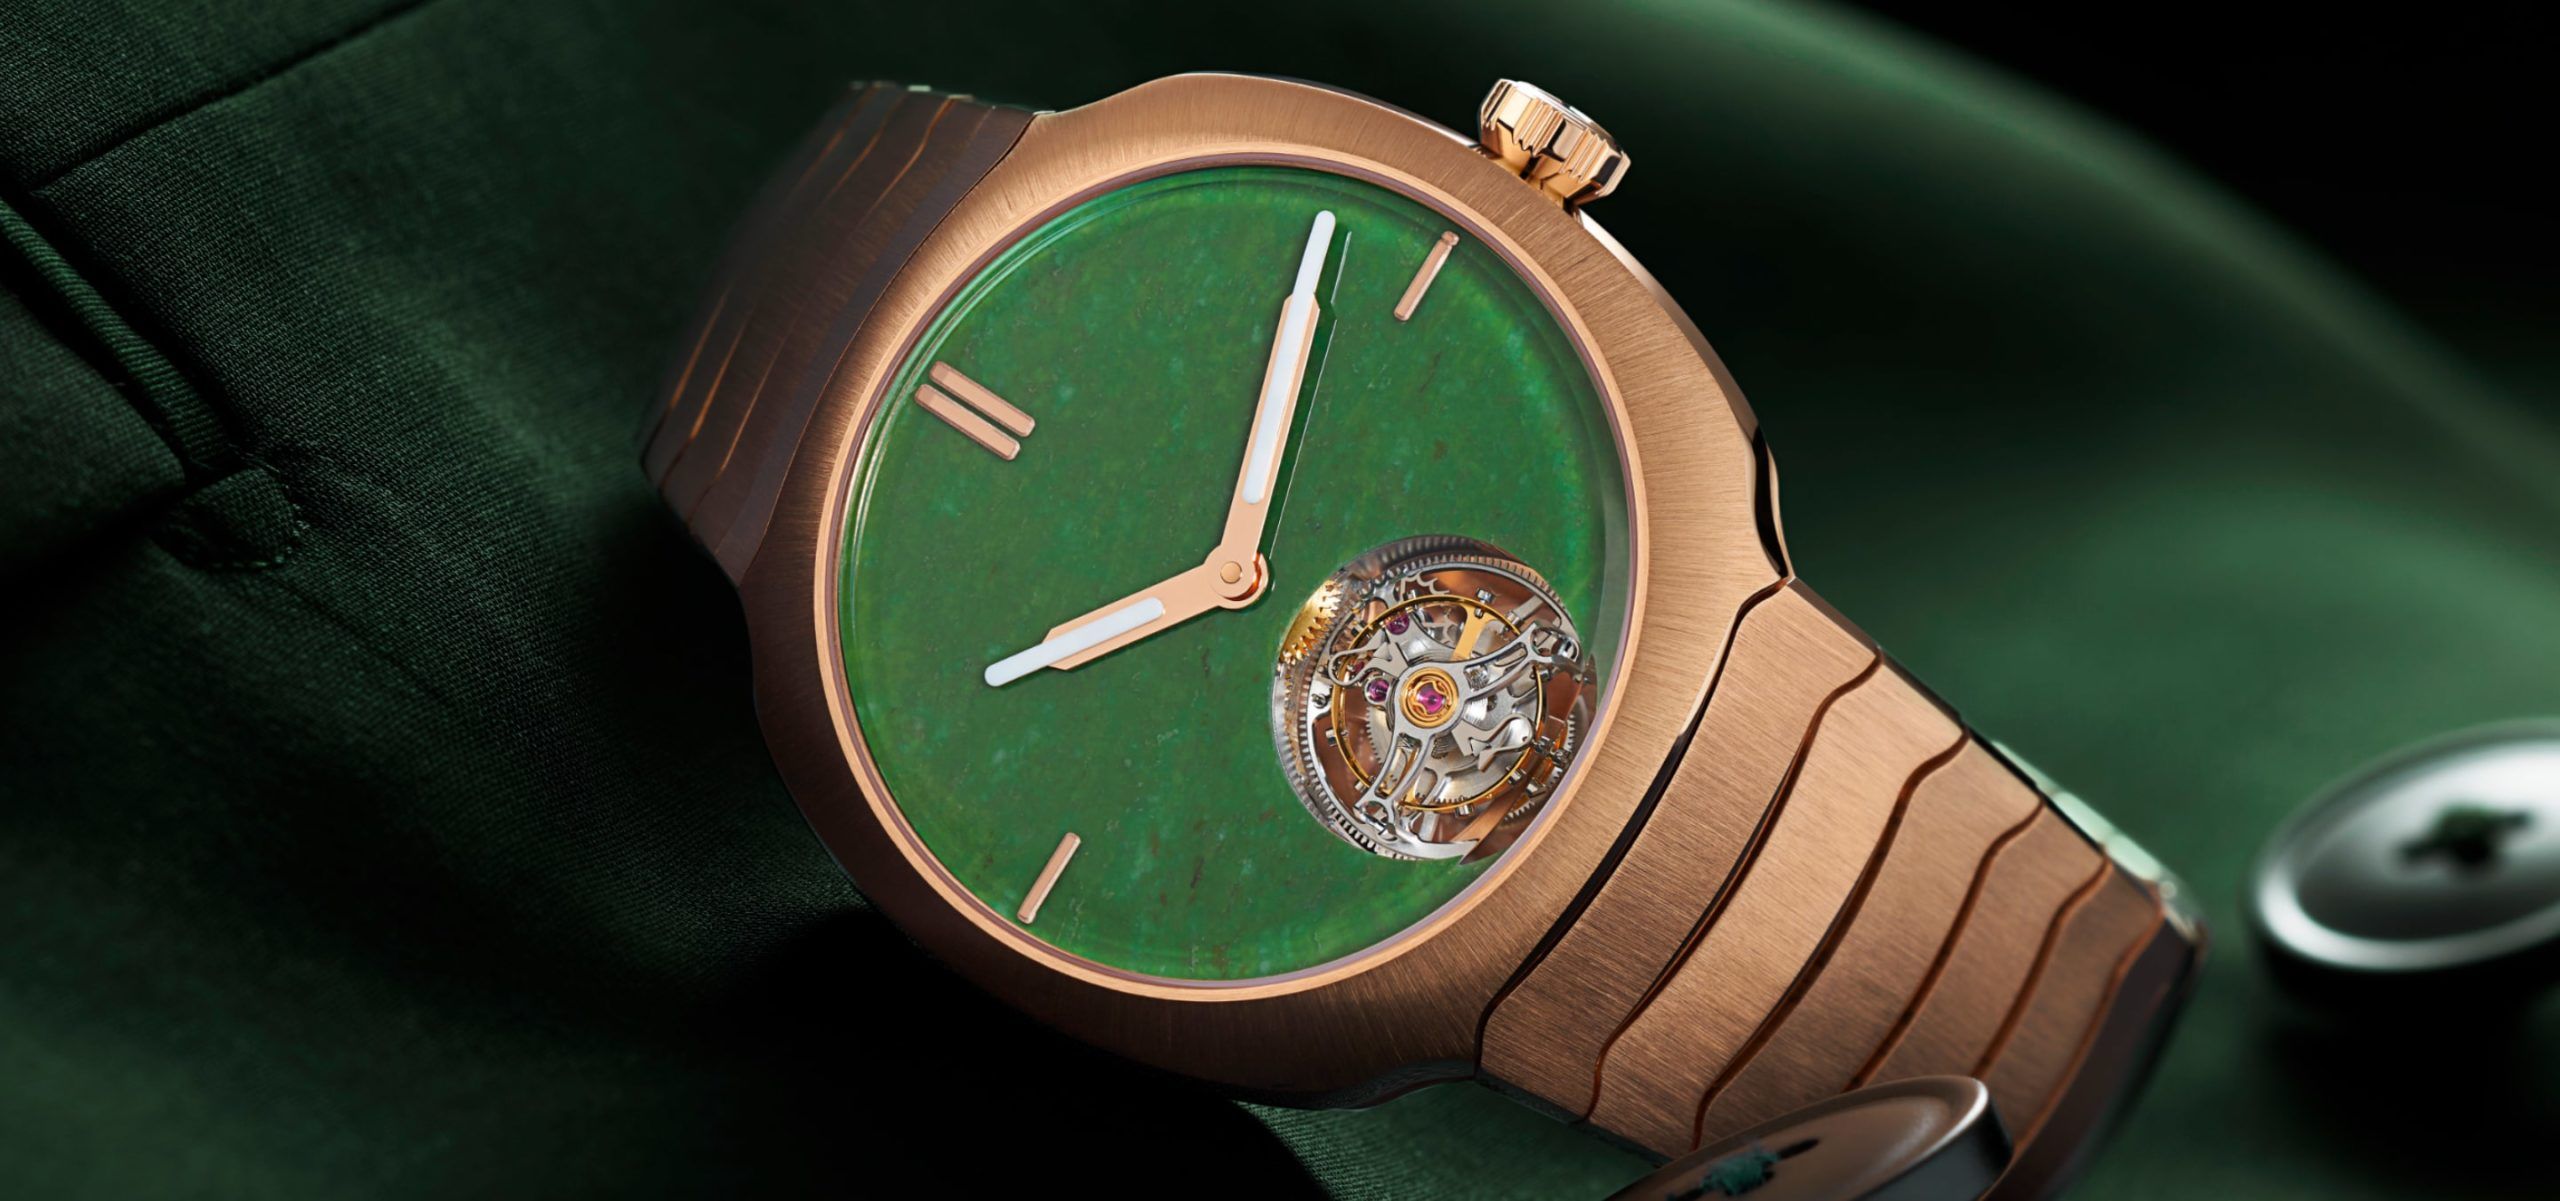 Mineral Makeover: H. Moser & Cie. Goes Green With A Wyoming Jade Dial In The Streamliner Tourbillon Concept